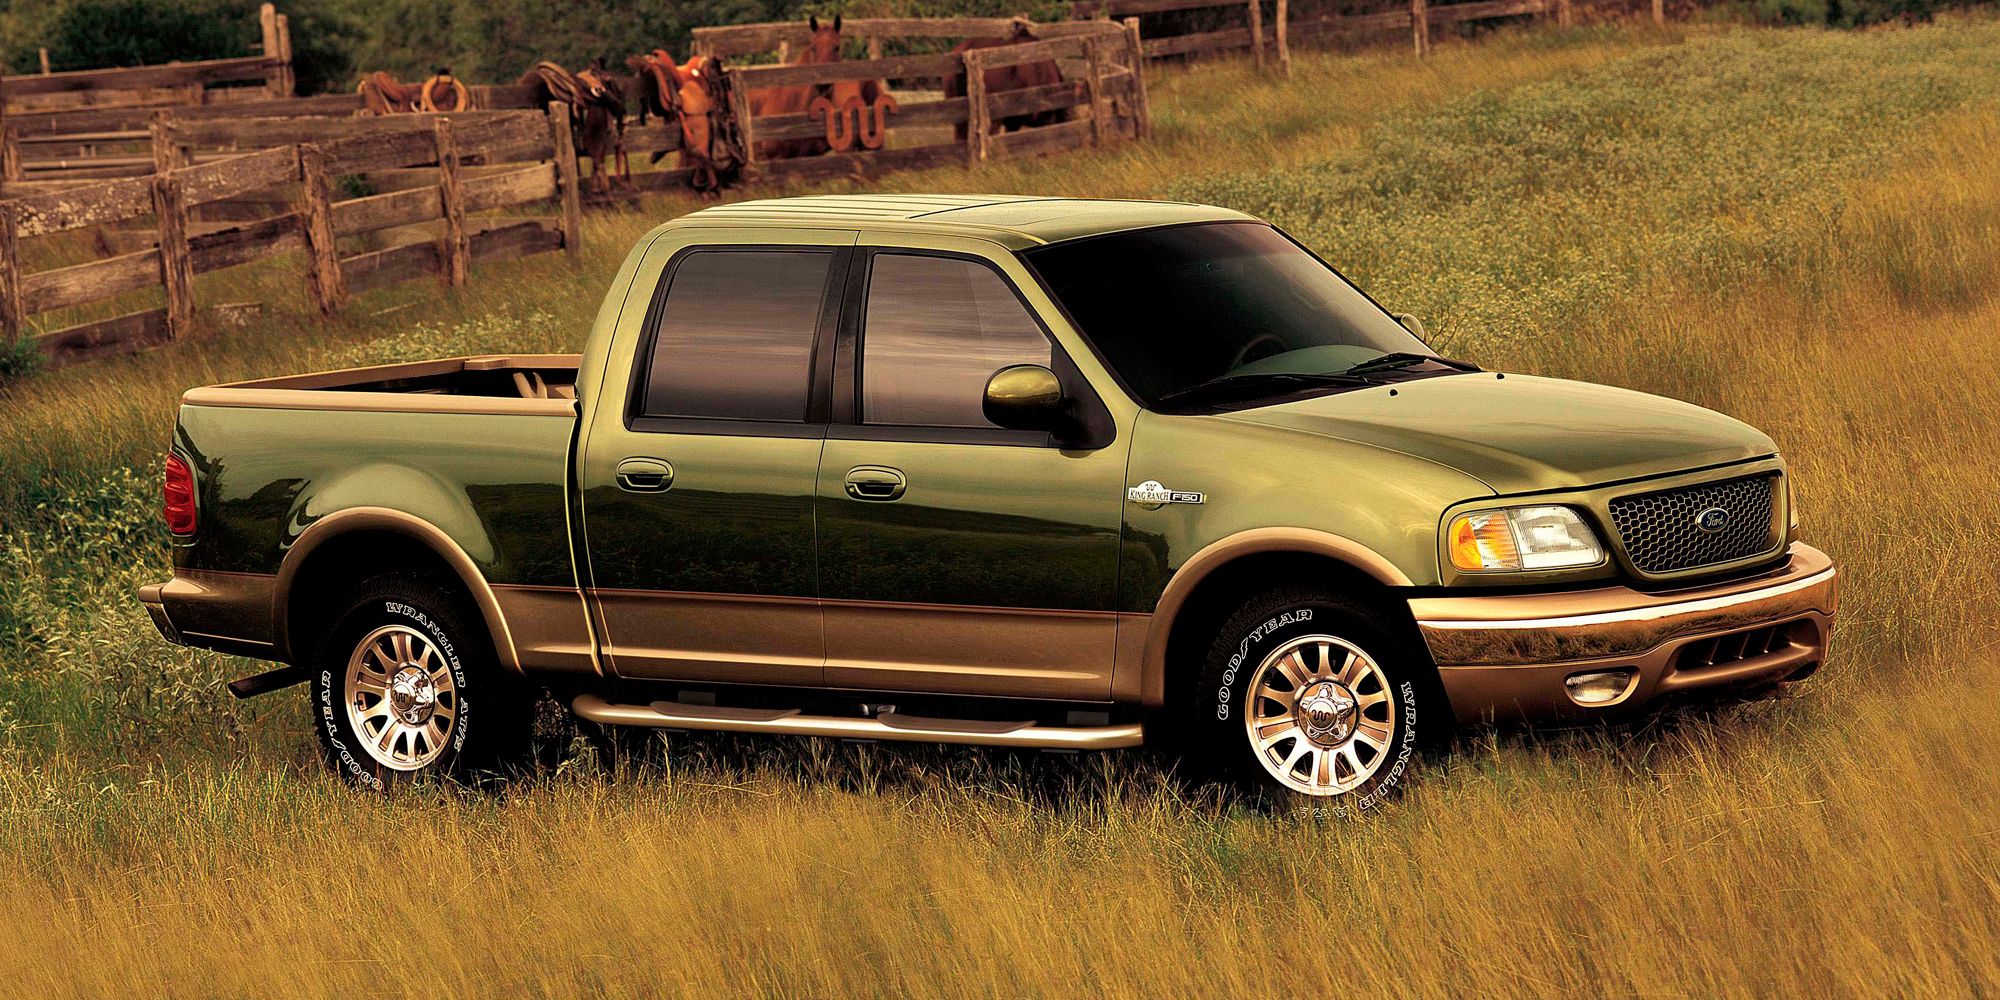 Front 3/4 view of a 2001 F-150 King Ranch on a field